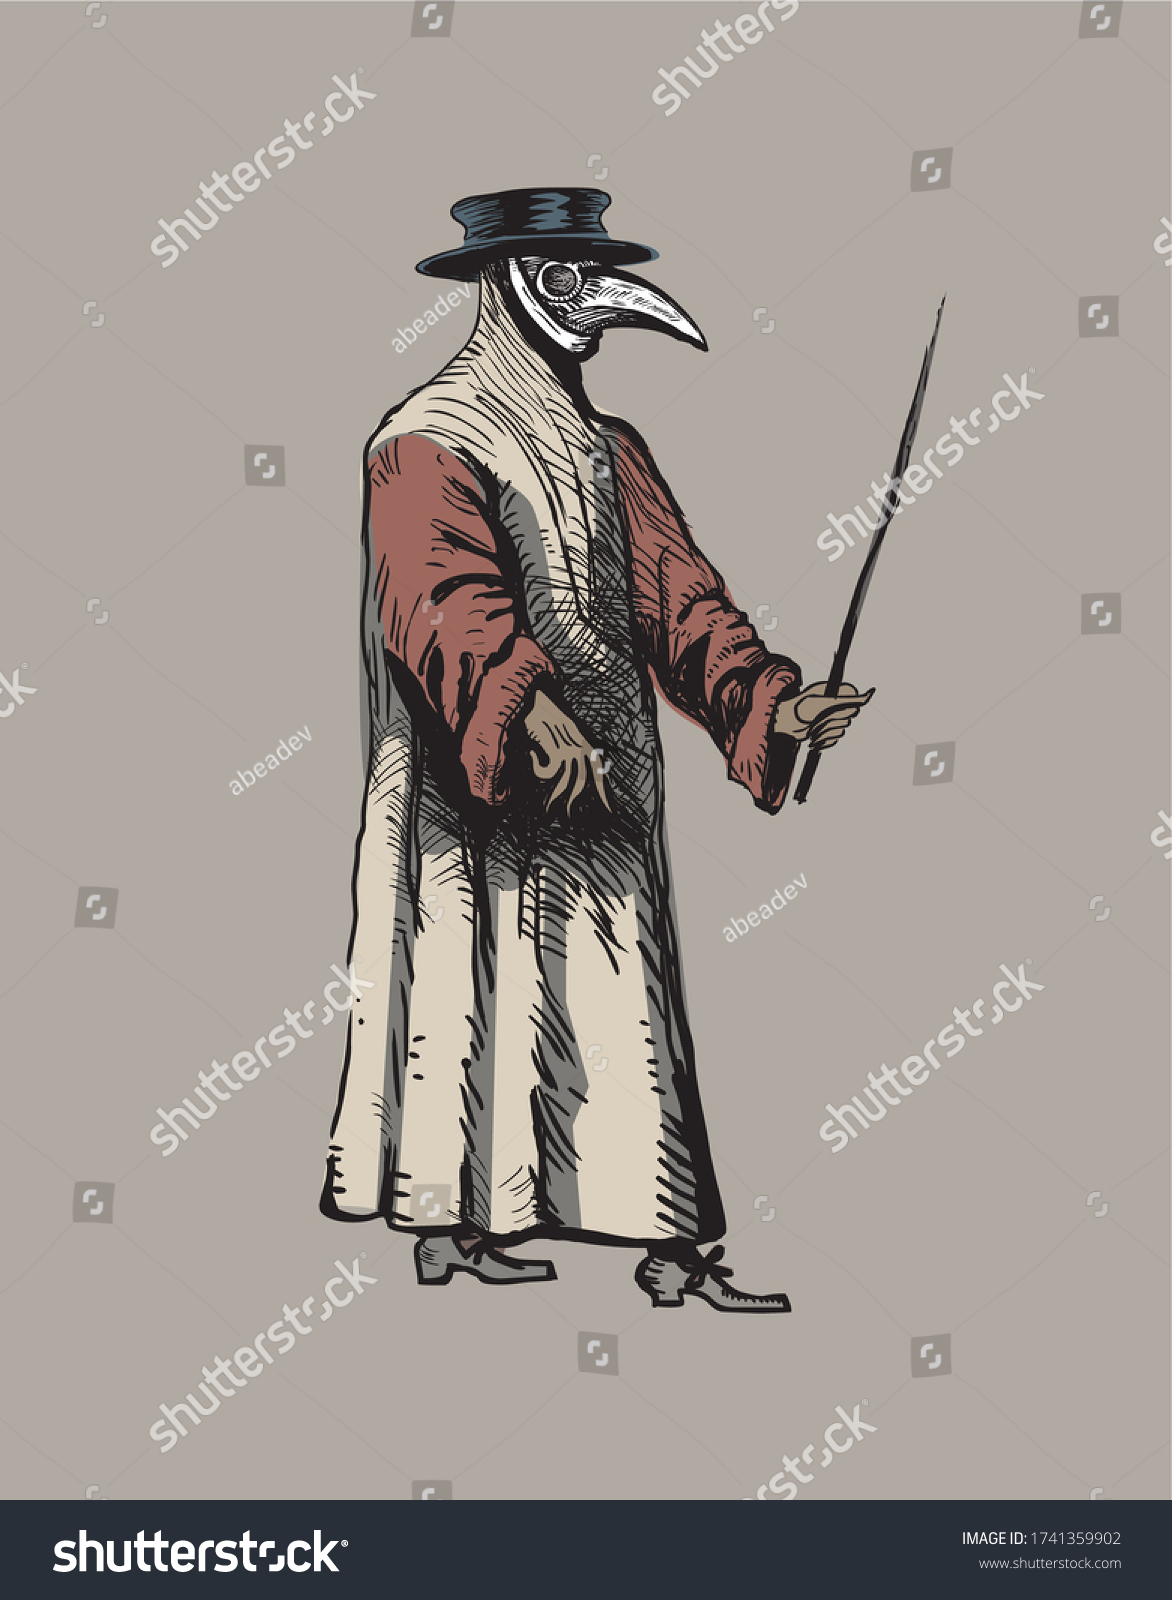 SVG of Plague doctor with bird mask and hat svg